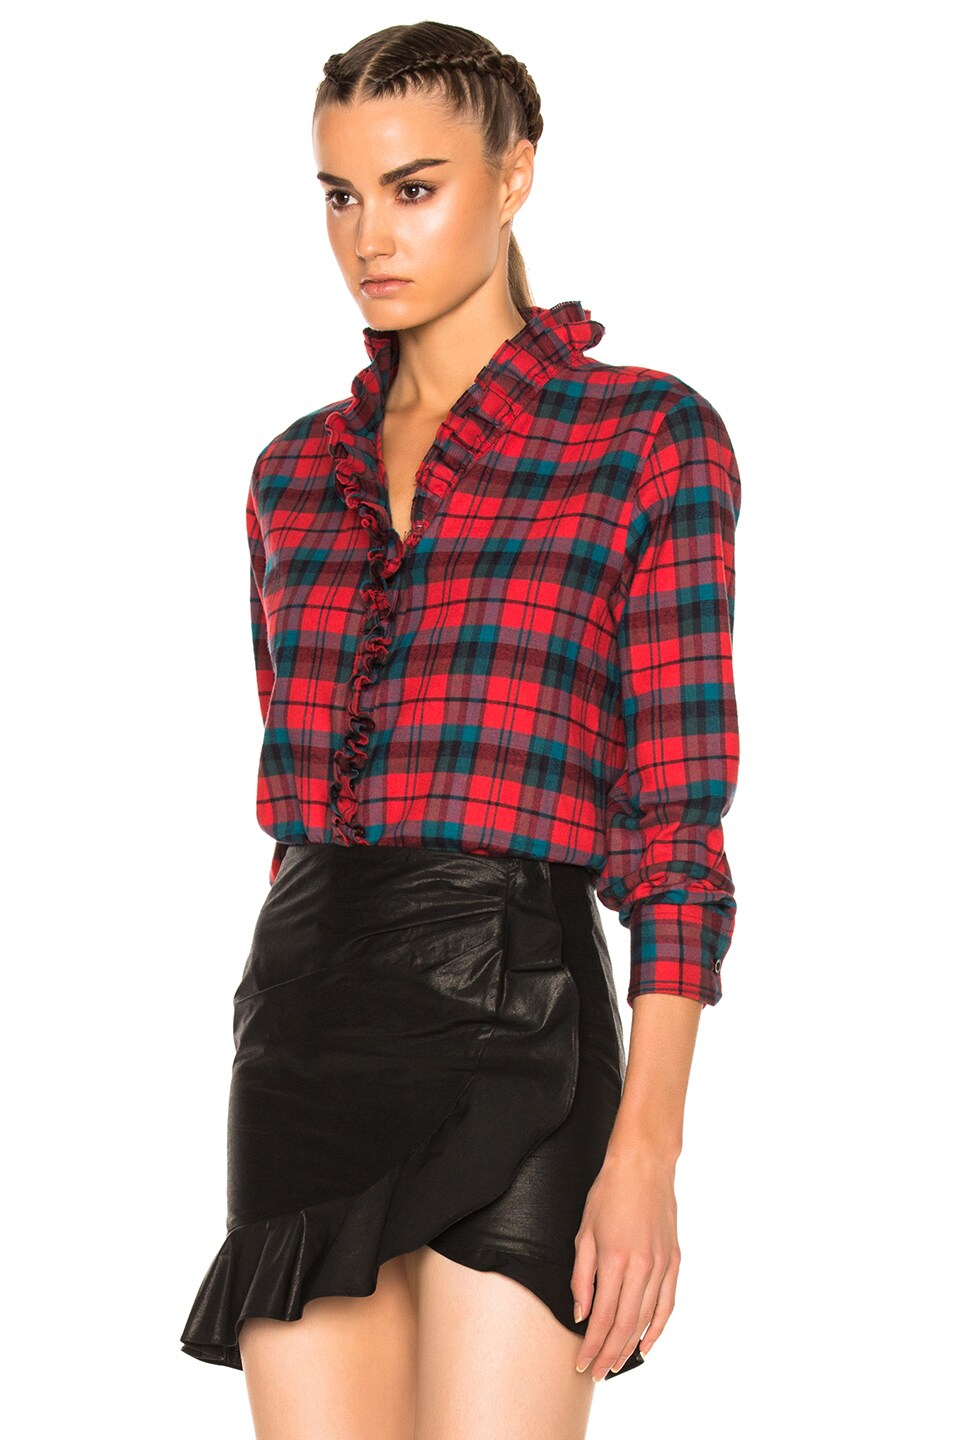 Isabel Marant Etoile Awendy Ruffled Check Shirt in Red | FWRD